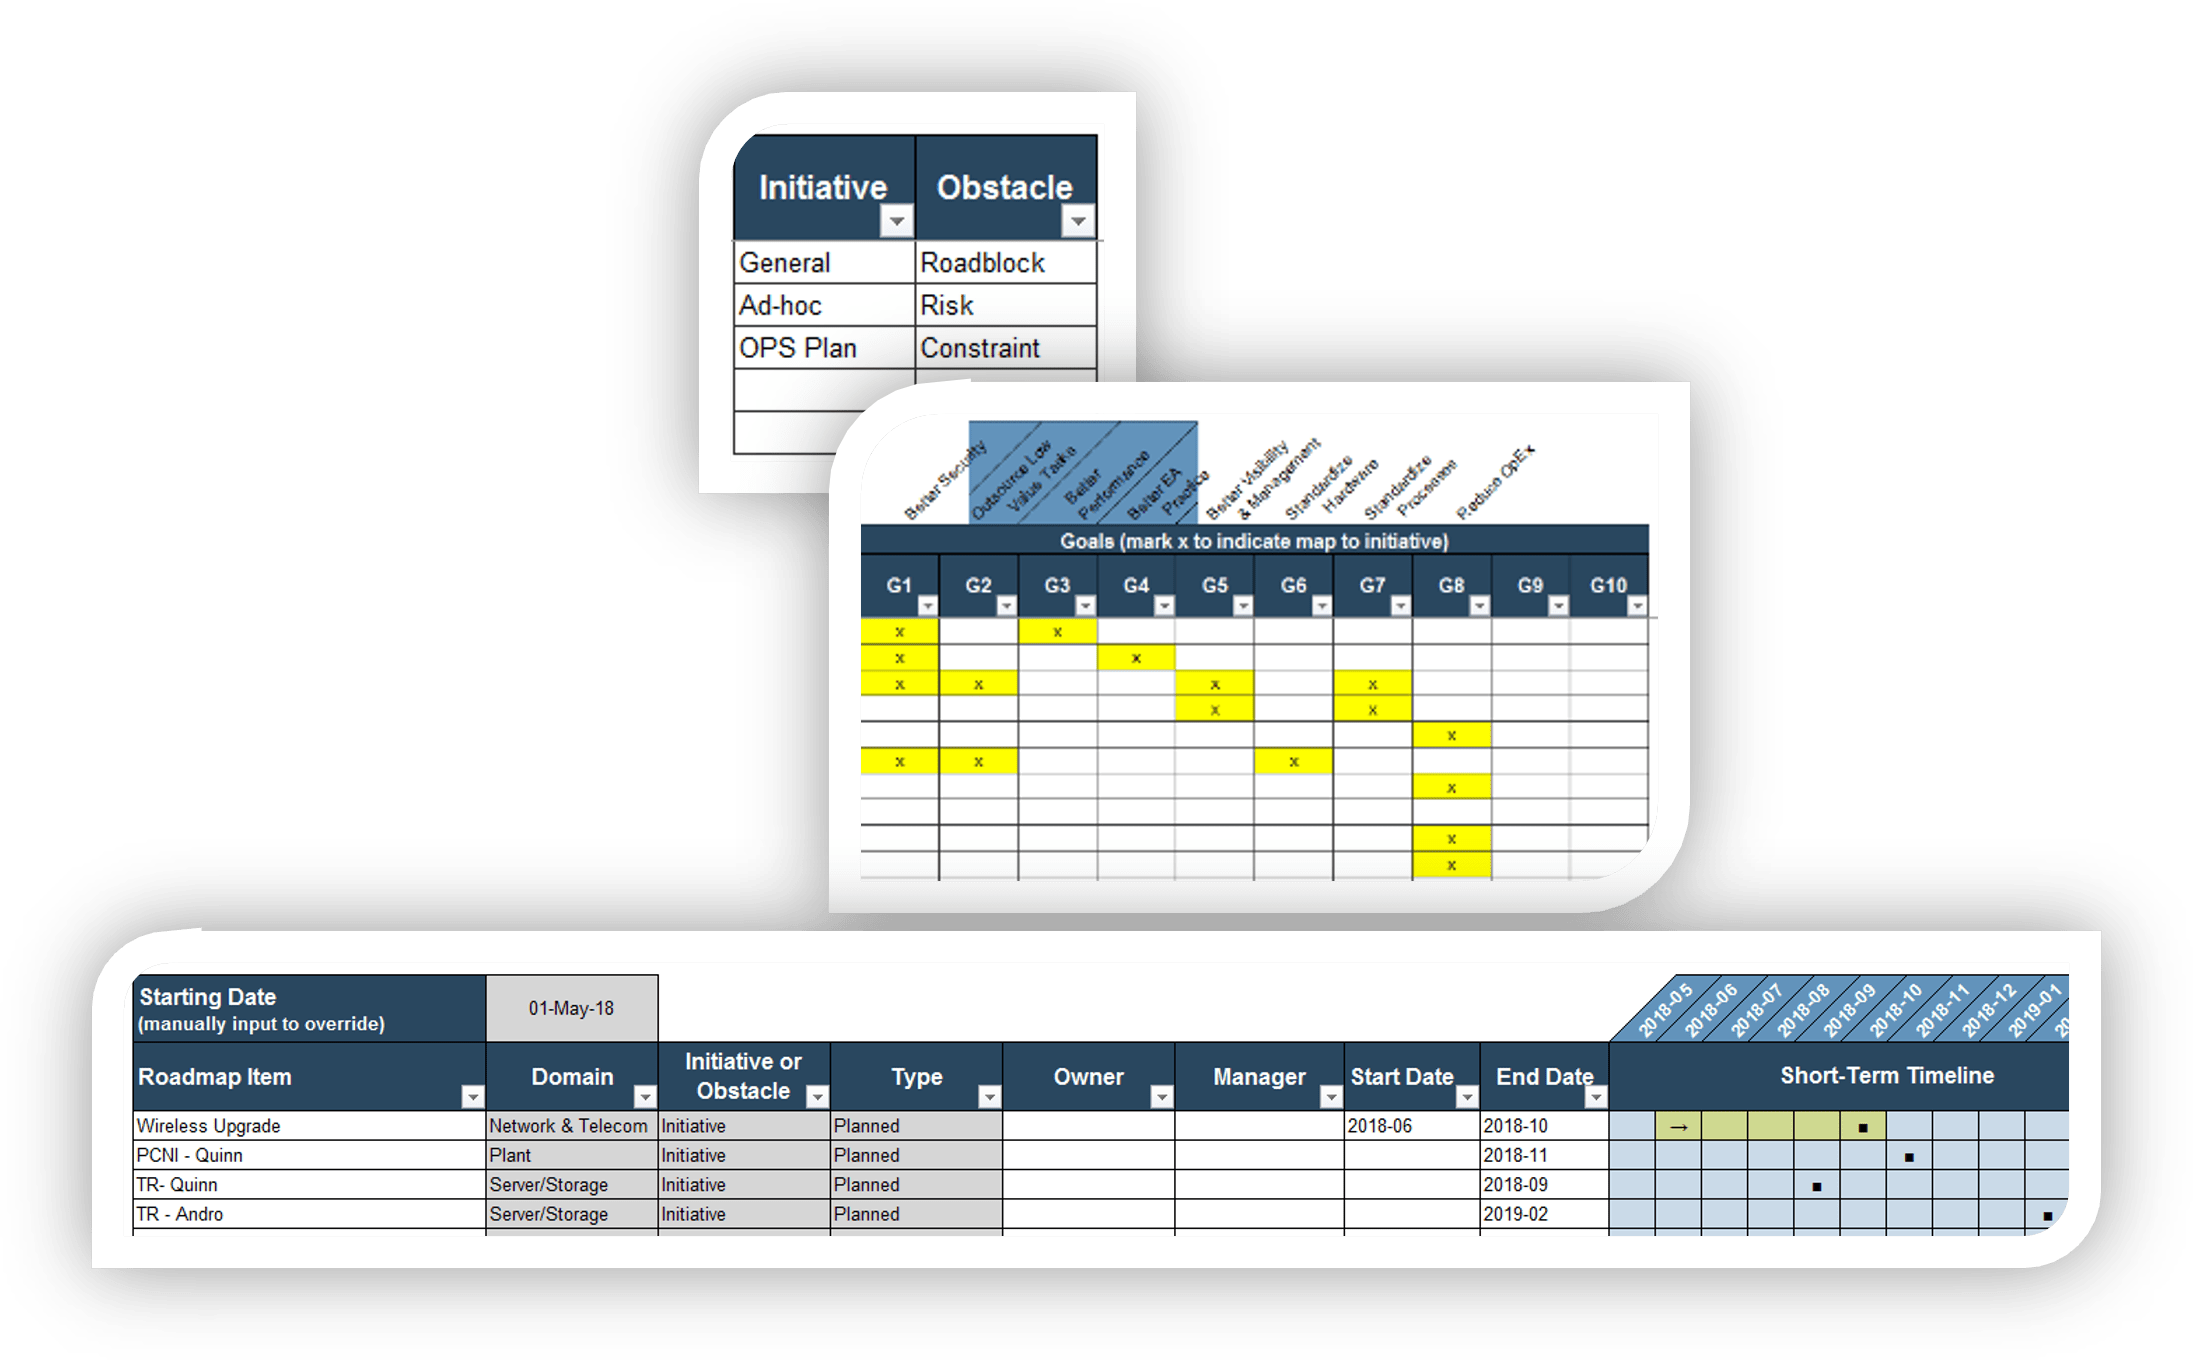 An image containing three screenshots of timeline tables from the Strategic Infrastructure Roadmap Tool